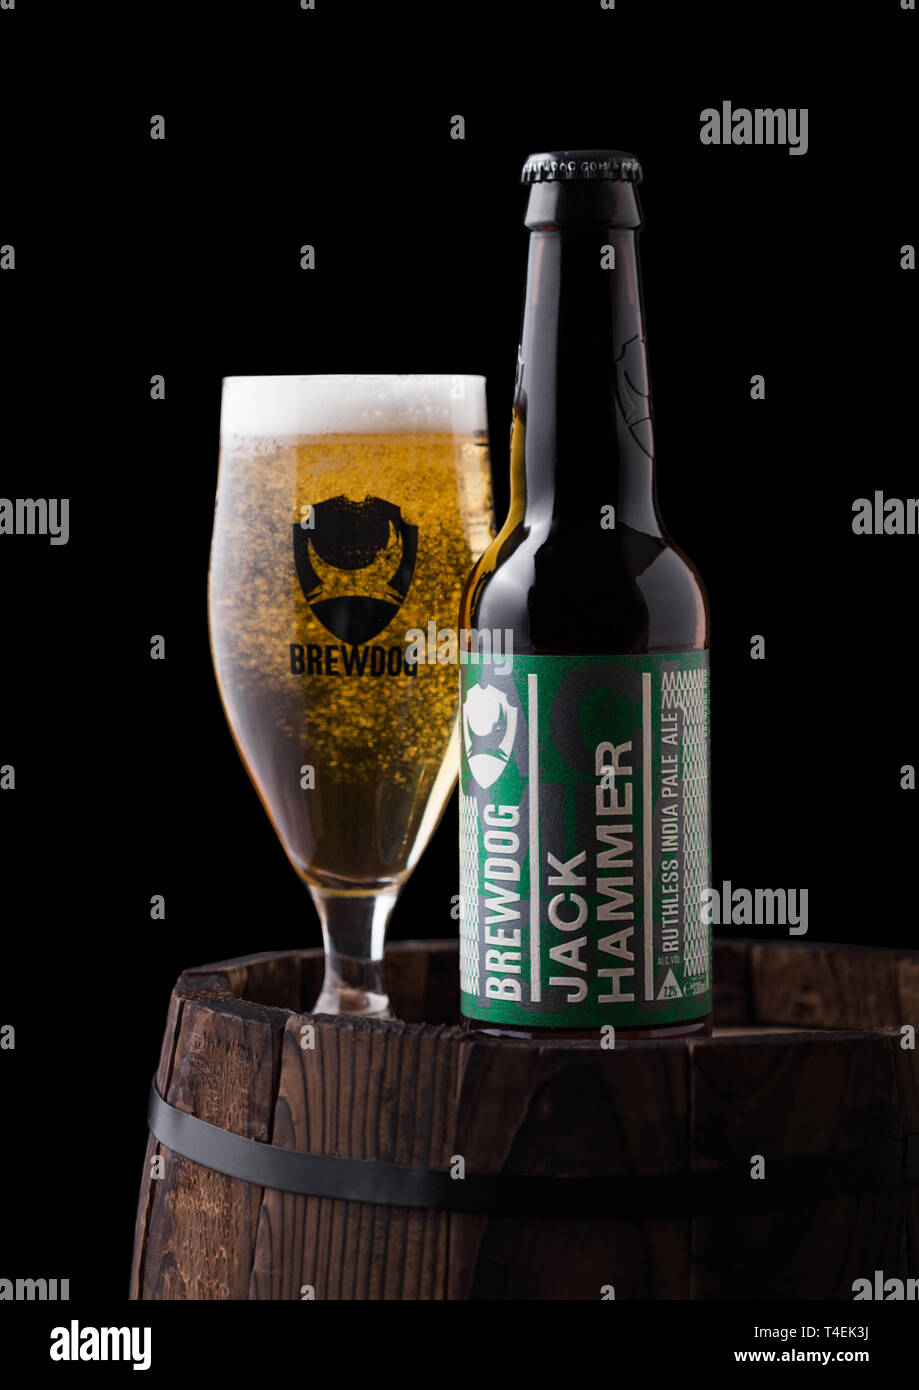 LONDON, UK - JUNE 06, 2018: Bottle and glass of Jack Hammer indian pale ale beer, from the Brewdog brewery on old wooden barrel on black background. Stock Photo